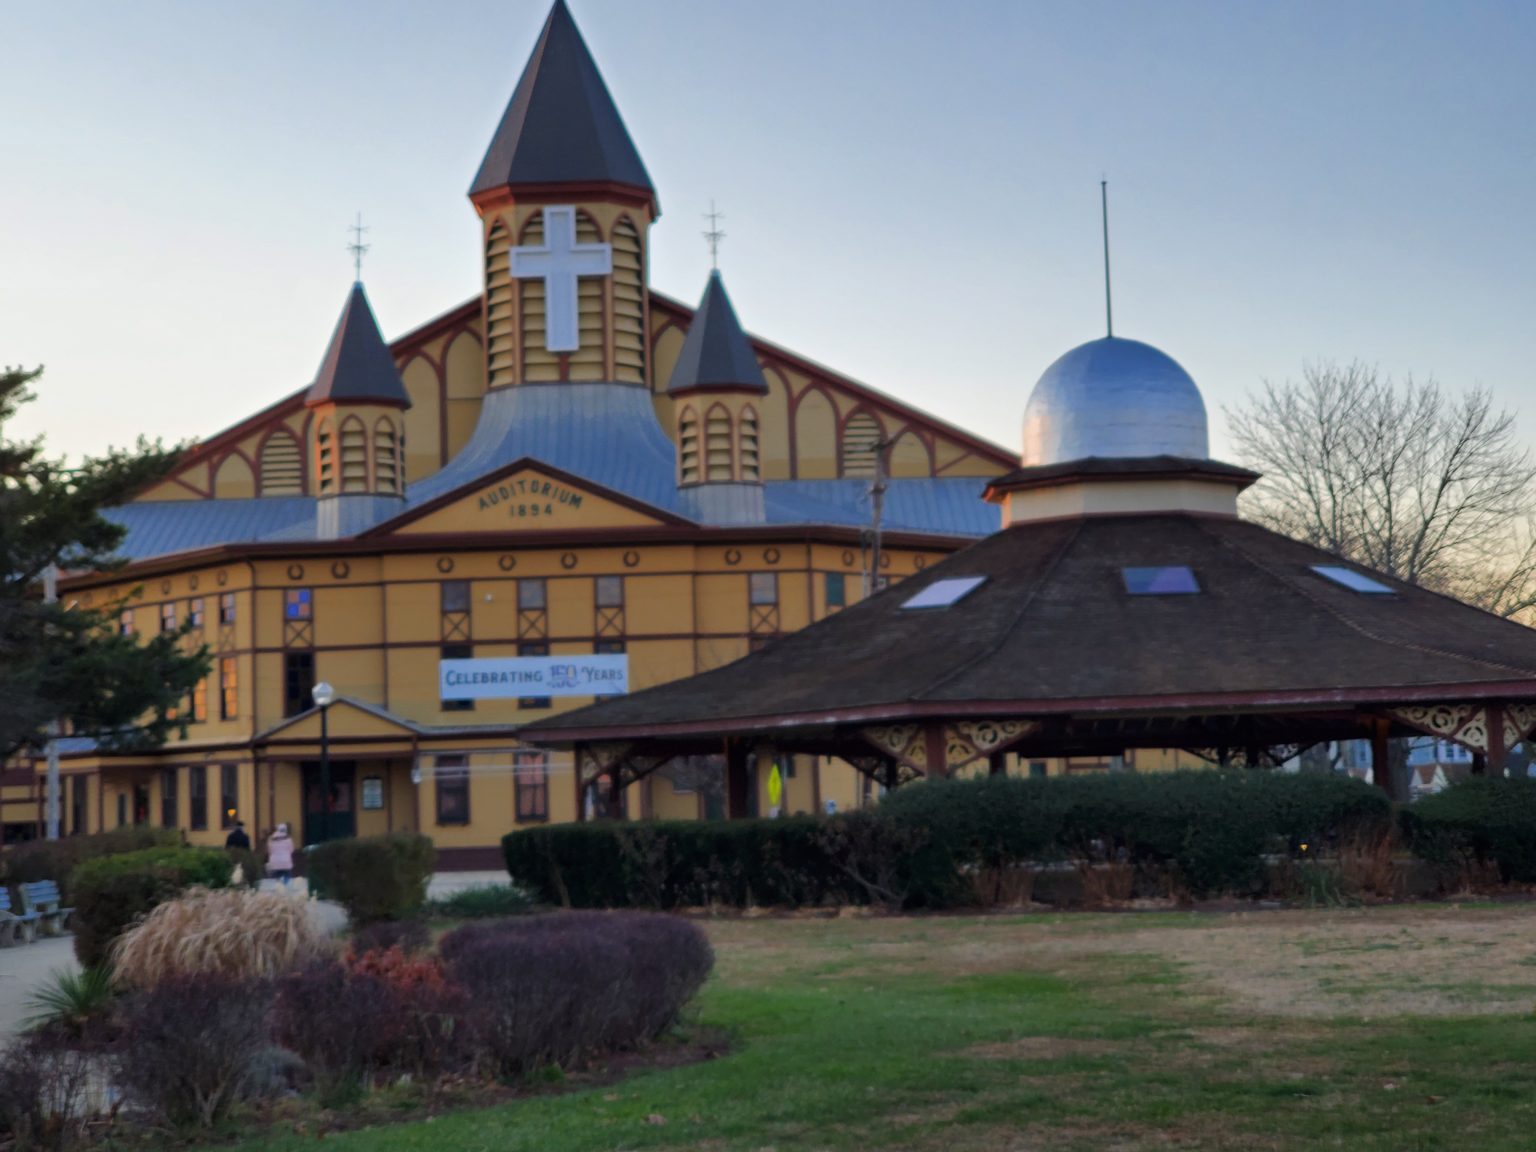 Ocean Grove Great Auditorium – Monmouth County NJ Views – Photoblog Of Events and Things To Do